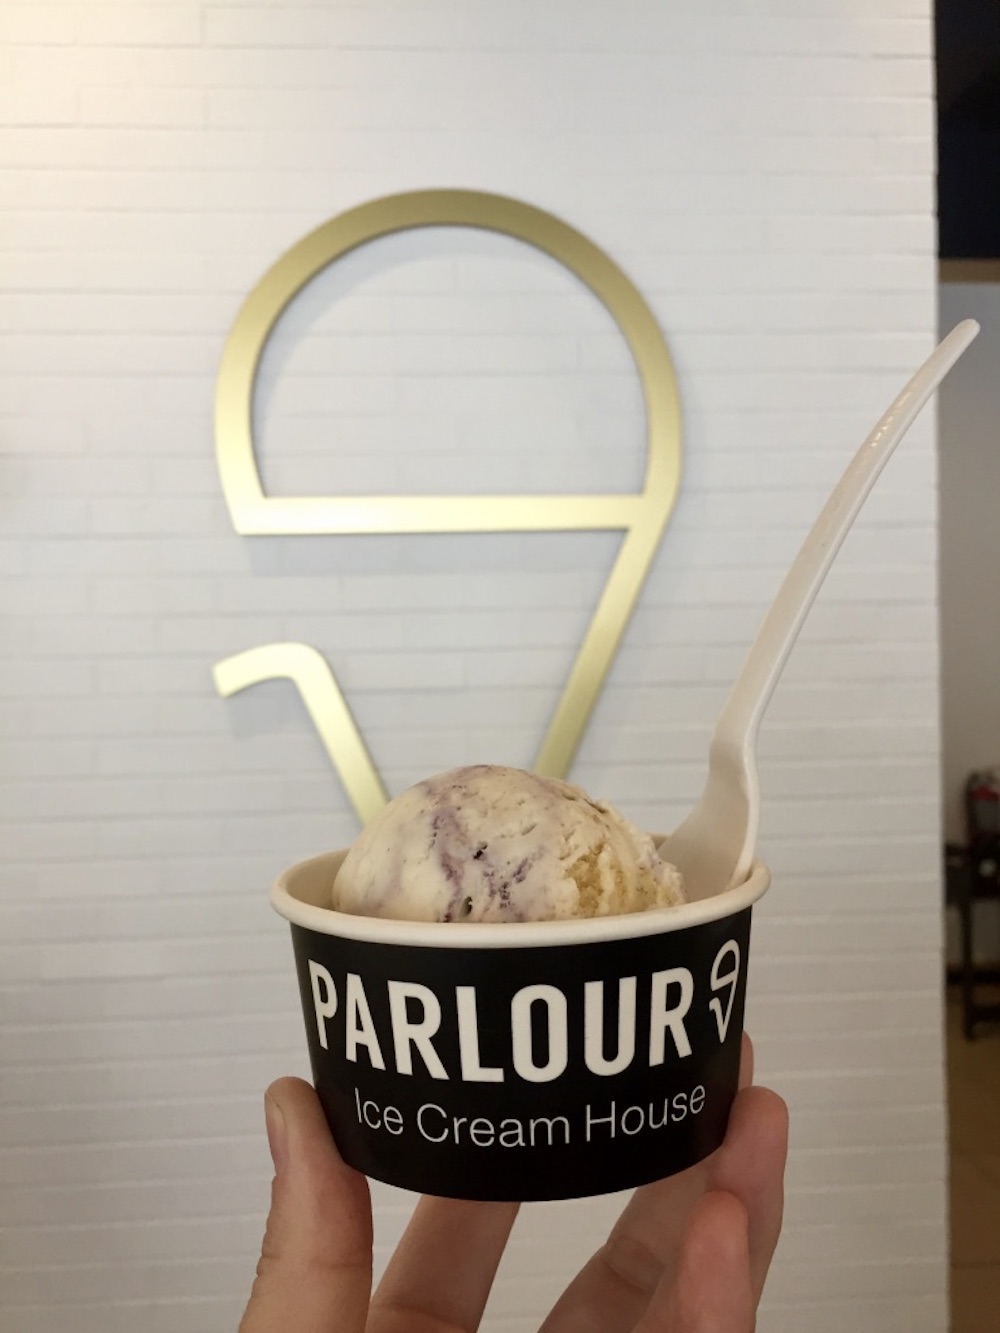 Cup of ice cream at Parlour Ice Cream in Sioux Falls, South Dakota